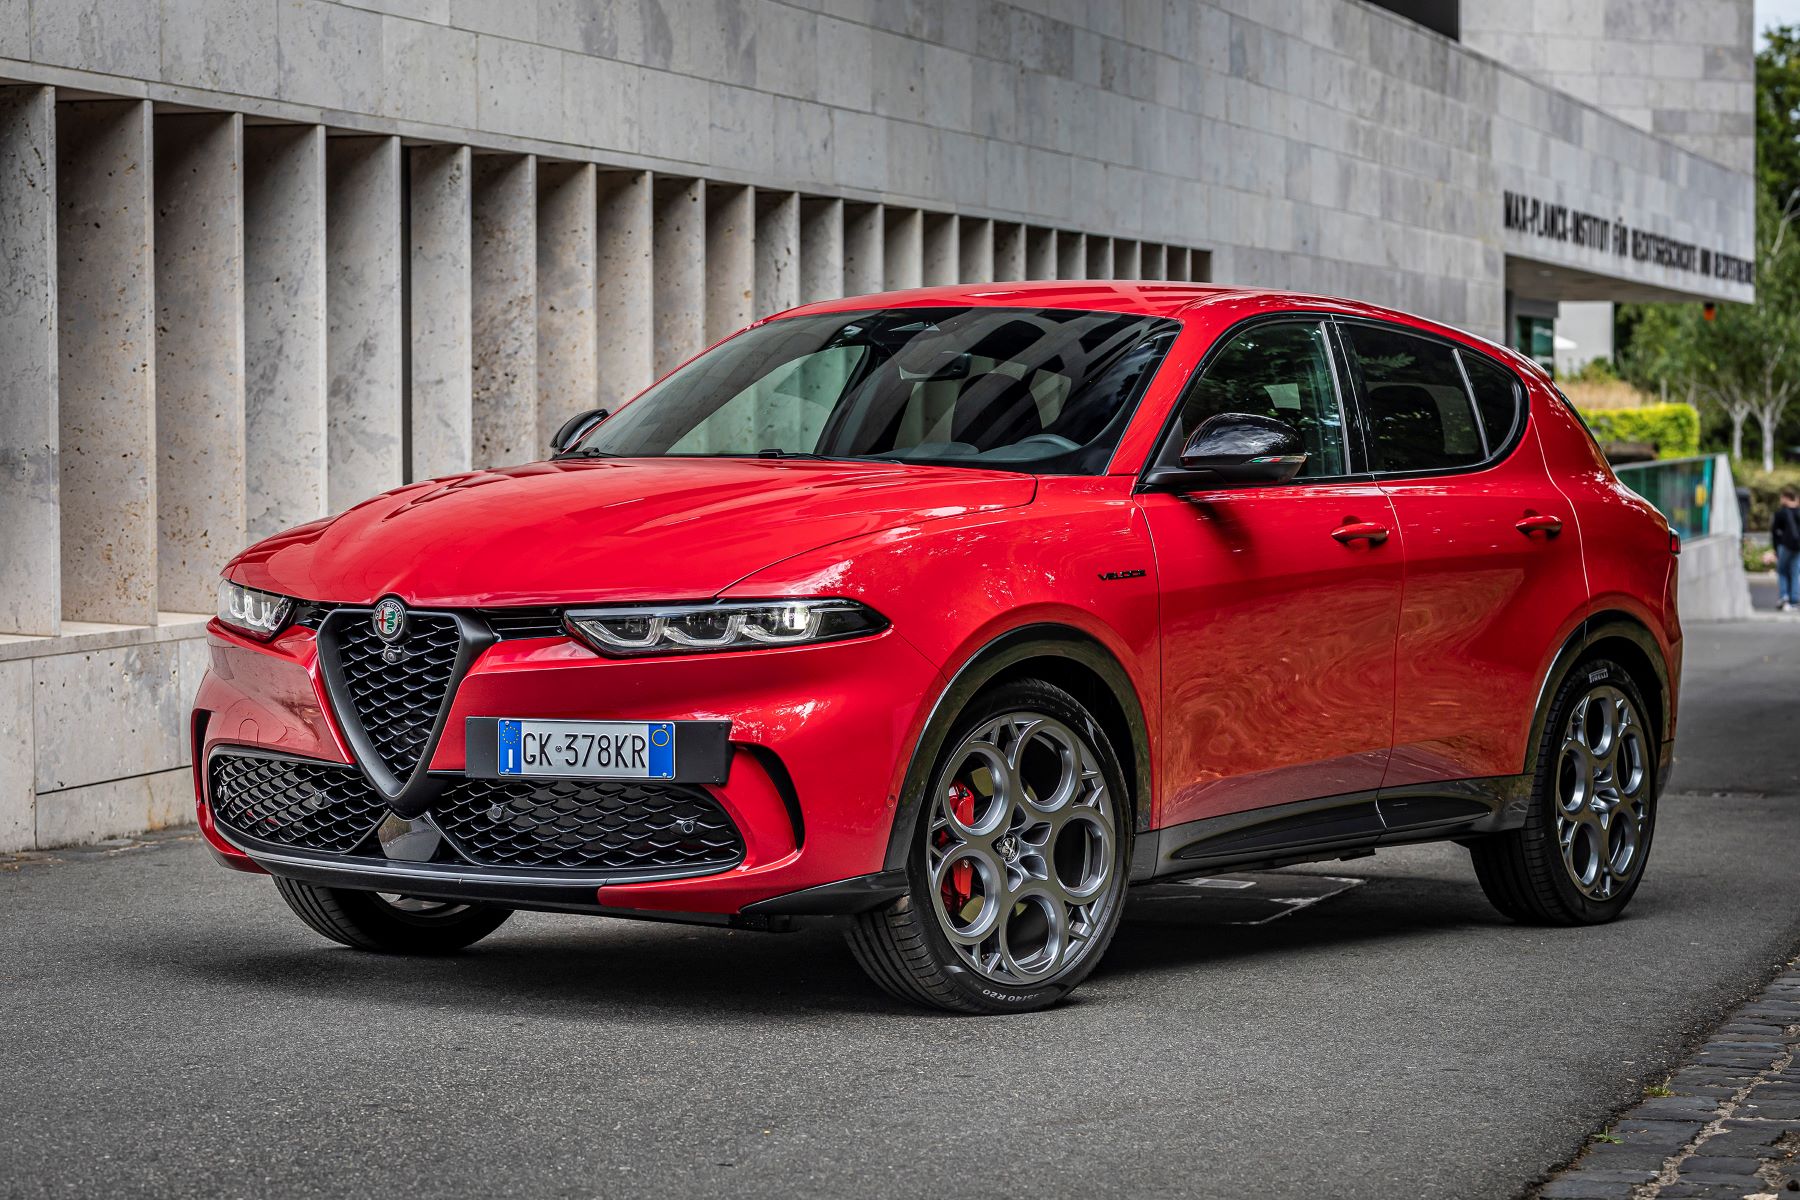 A red 2023 Alfa Romeo Tonale Veloce plug-in hybrid electric vehicle (PHEV) compact SUV model